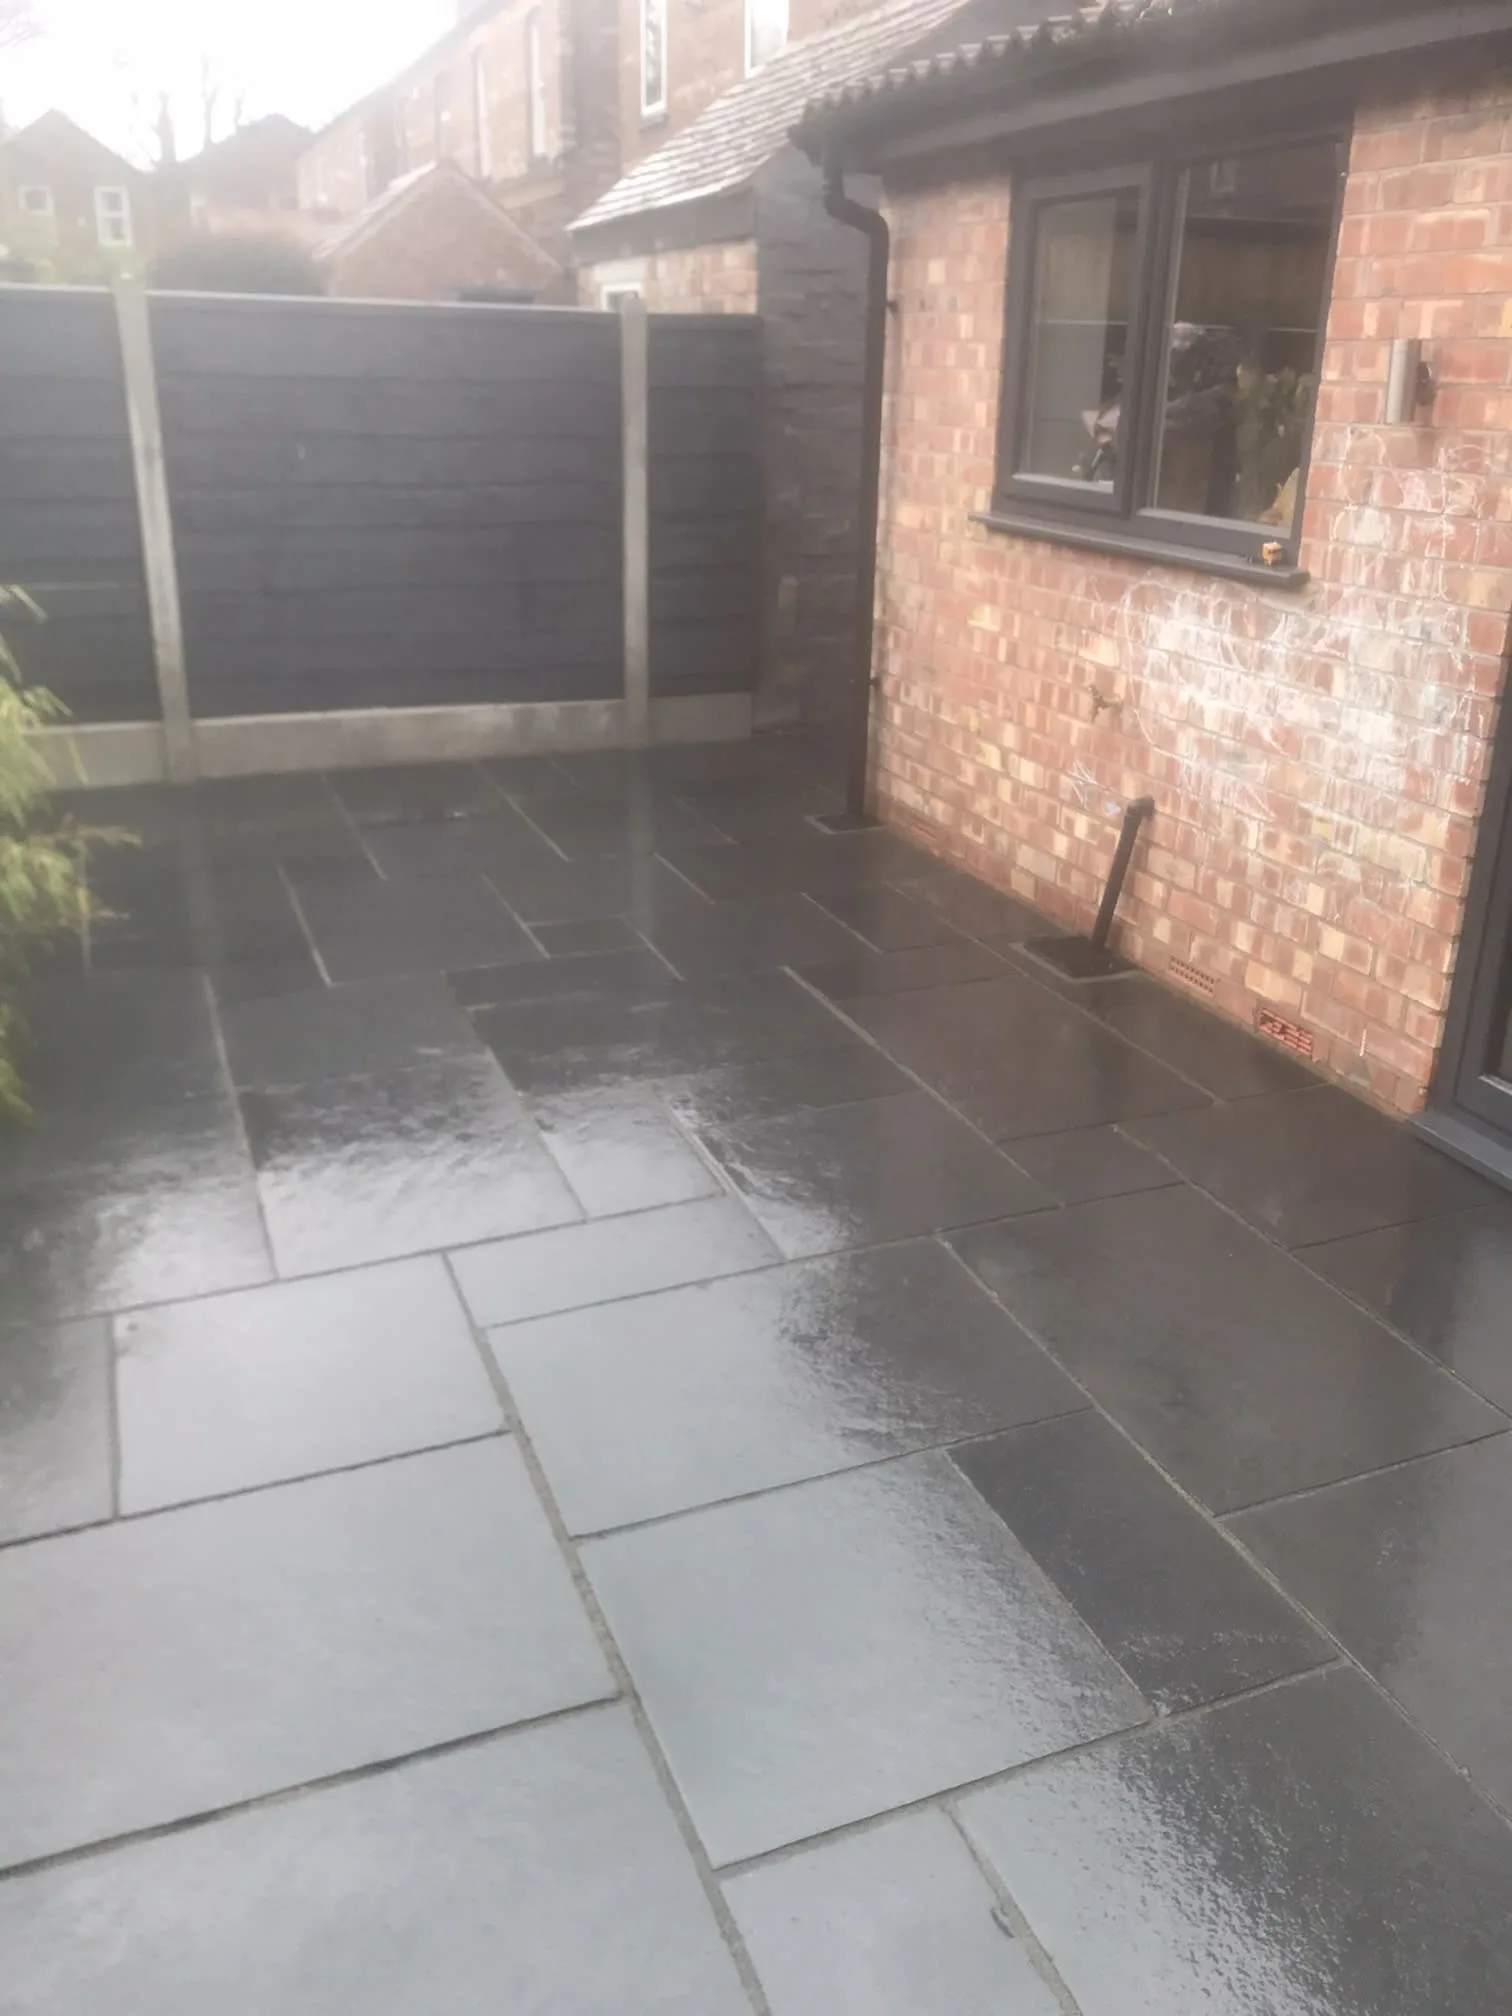 Rightways Cleaning Solutions Manchester 07354 424231